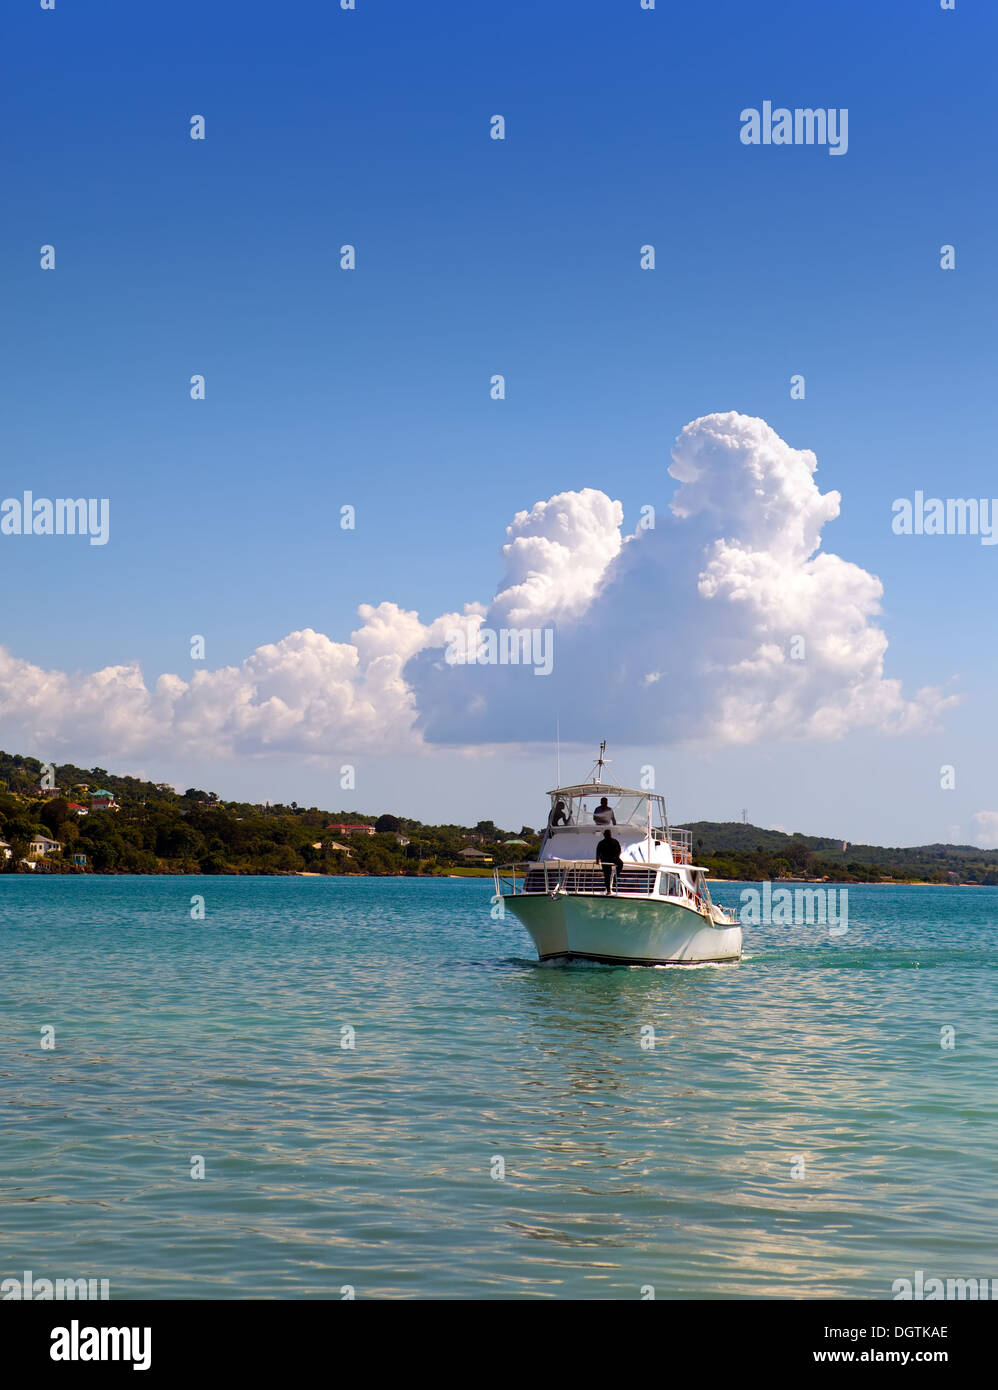 The motor boat in the sea. Jamaica Stock Photo